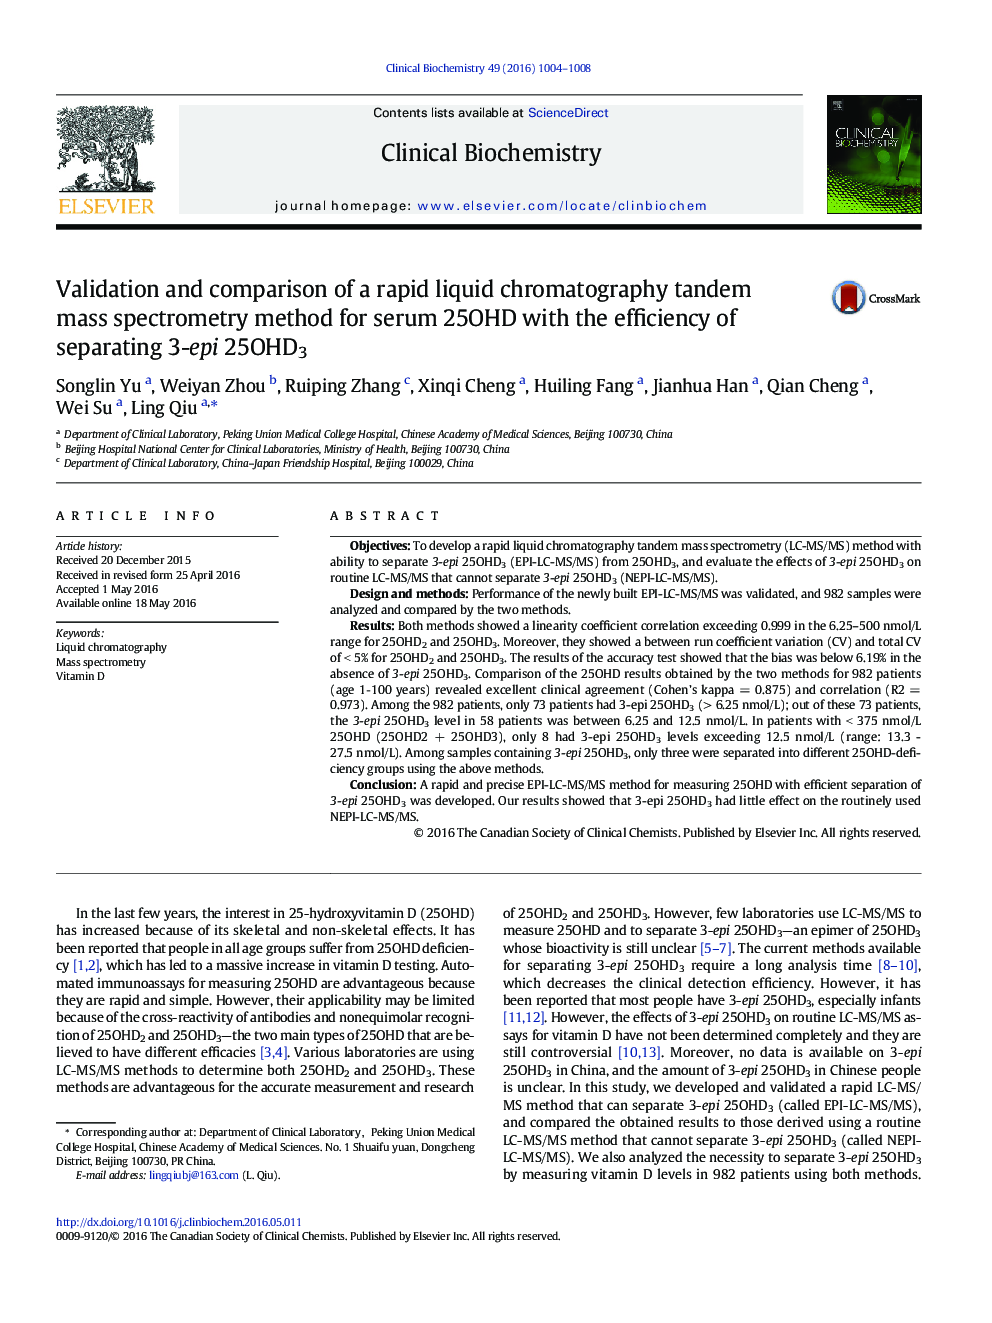 Validation and comparison of a rapid liquid chromatography tandem mass spectrometry method for serum 25OHD with the efficiency of separating 3-epi 25OHD3